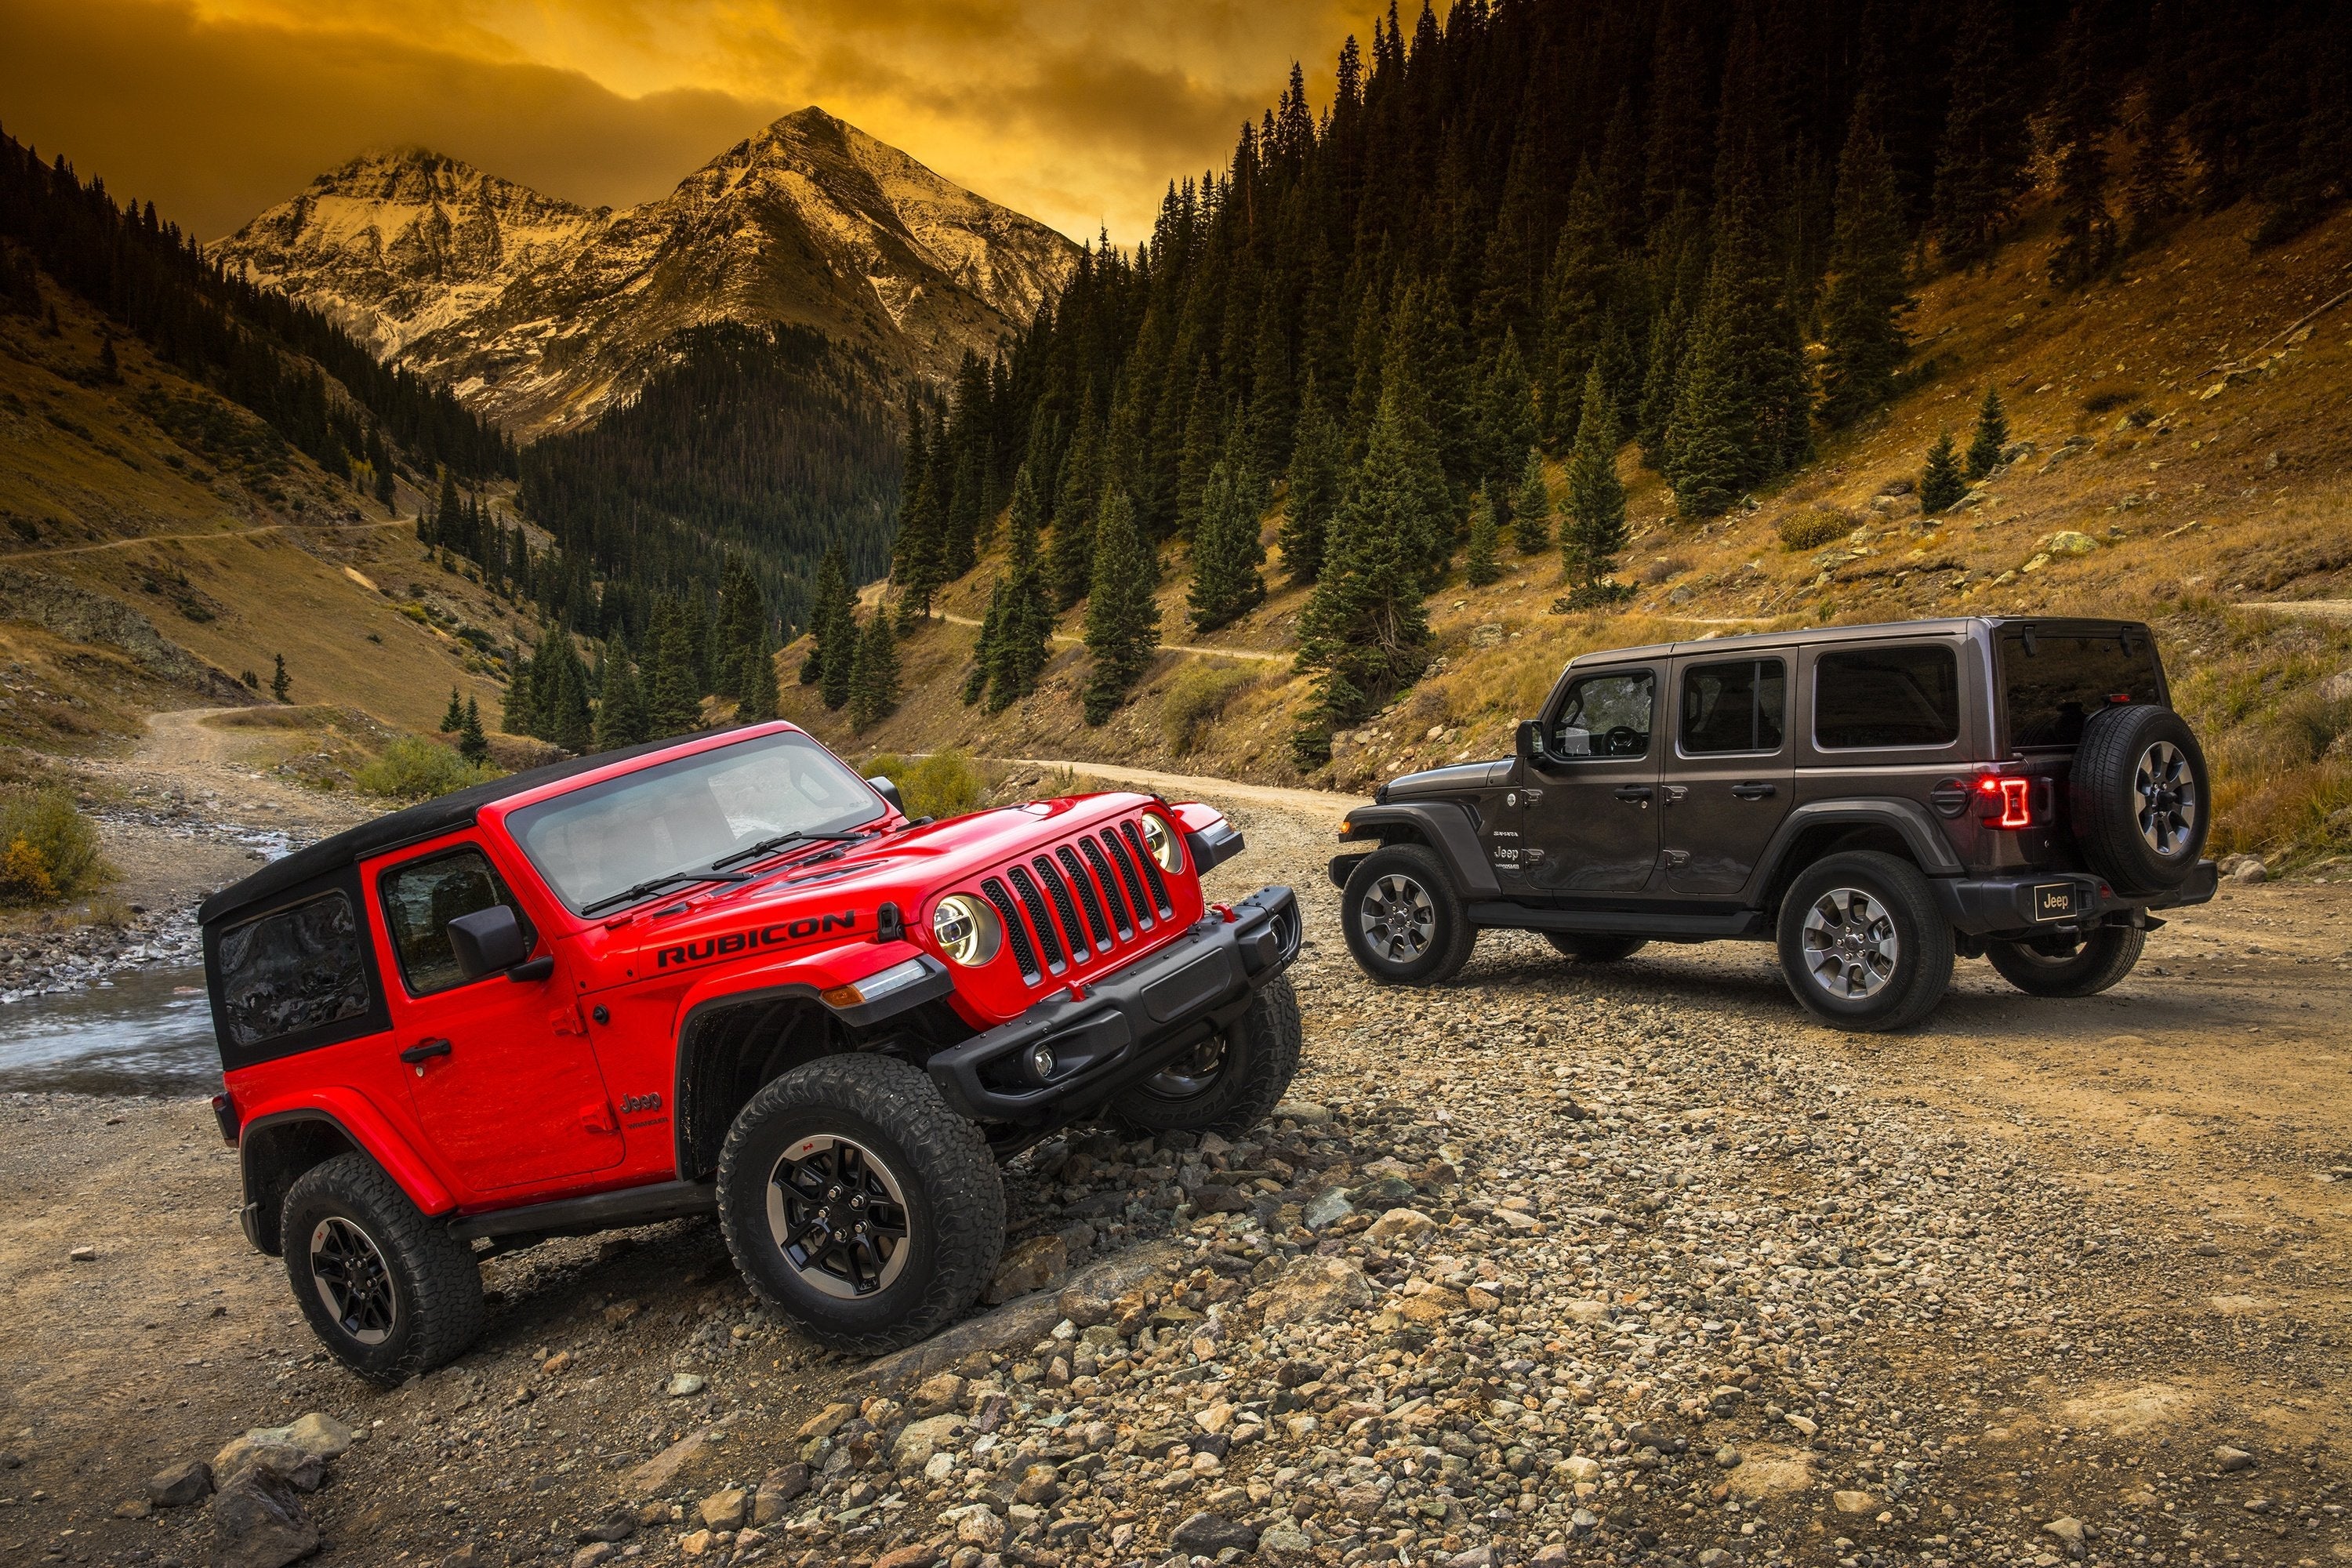 How to Adjust Headlights on Jeep Wrangler JL: Complete Guide!